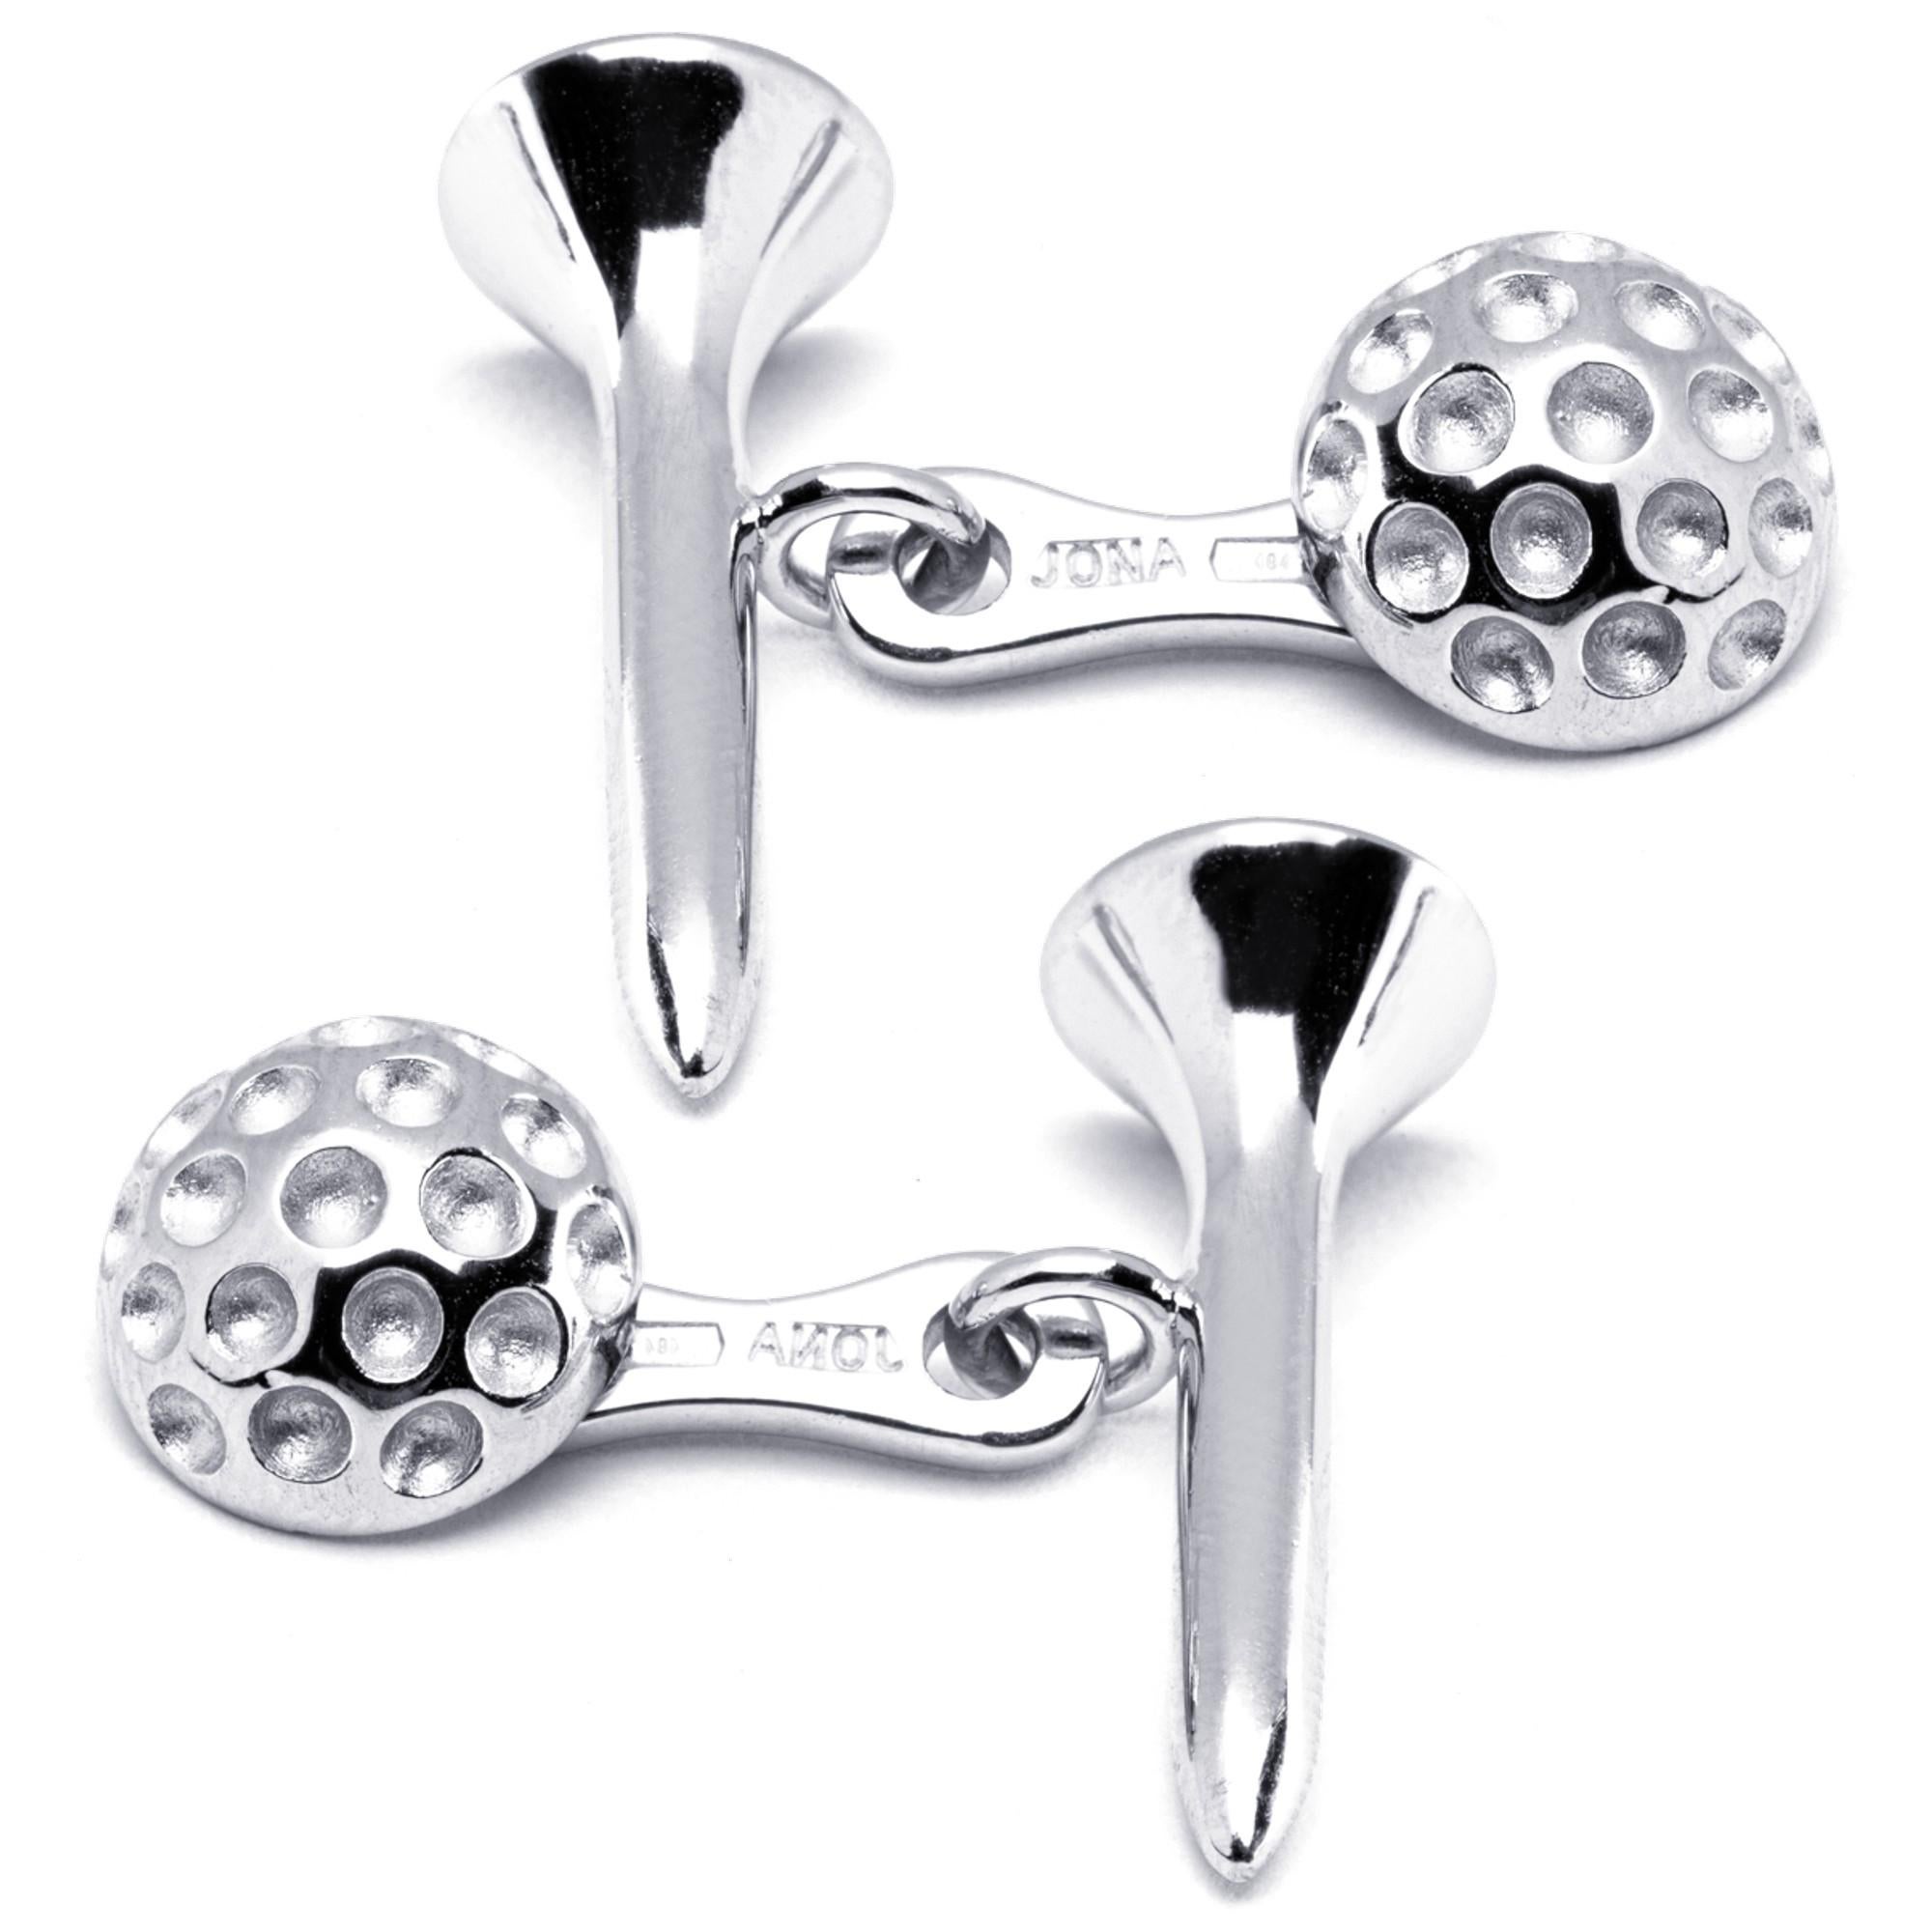 Tee and Golf Ball Sterling Silver Cufflinks